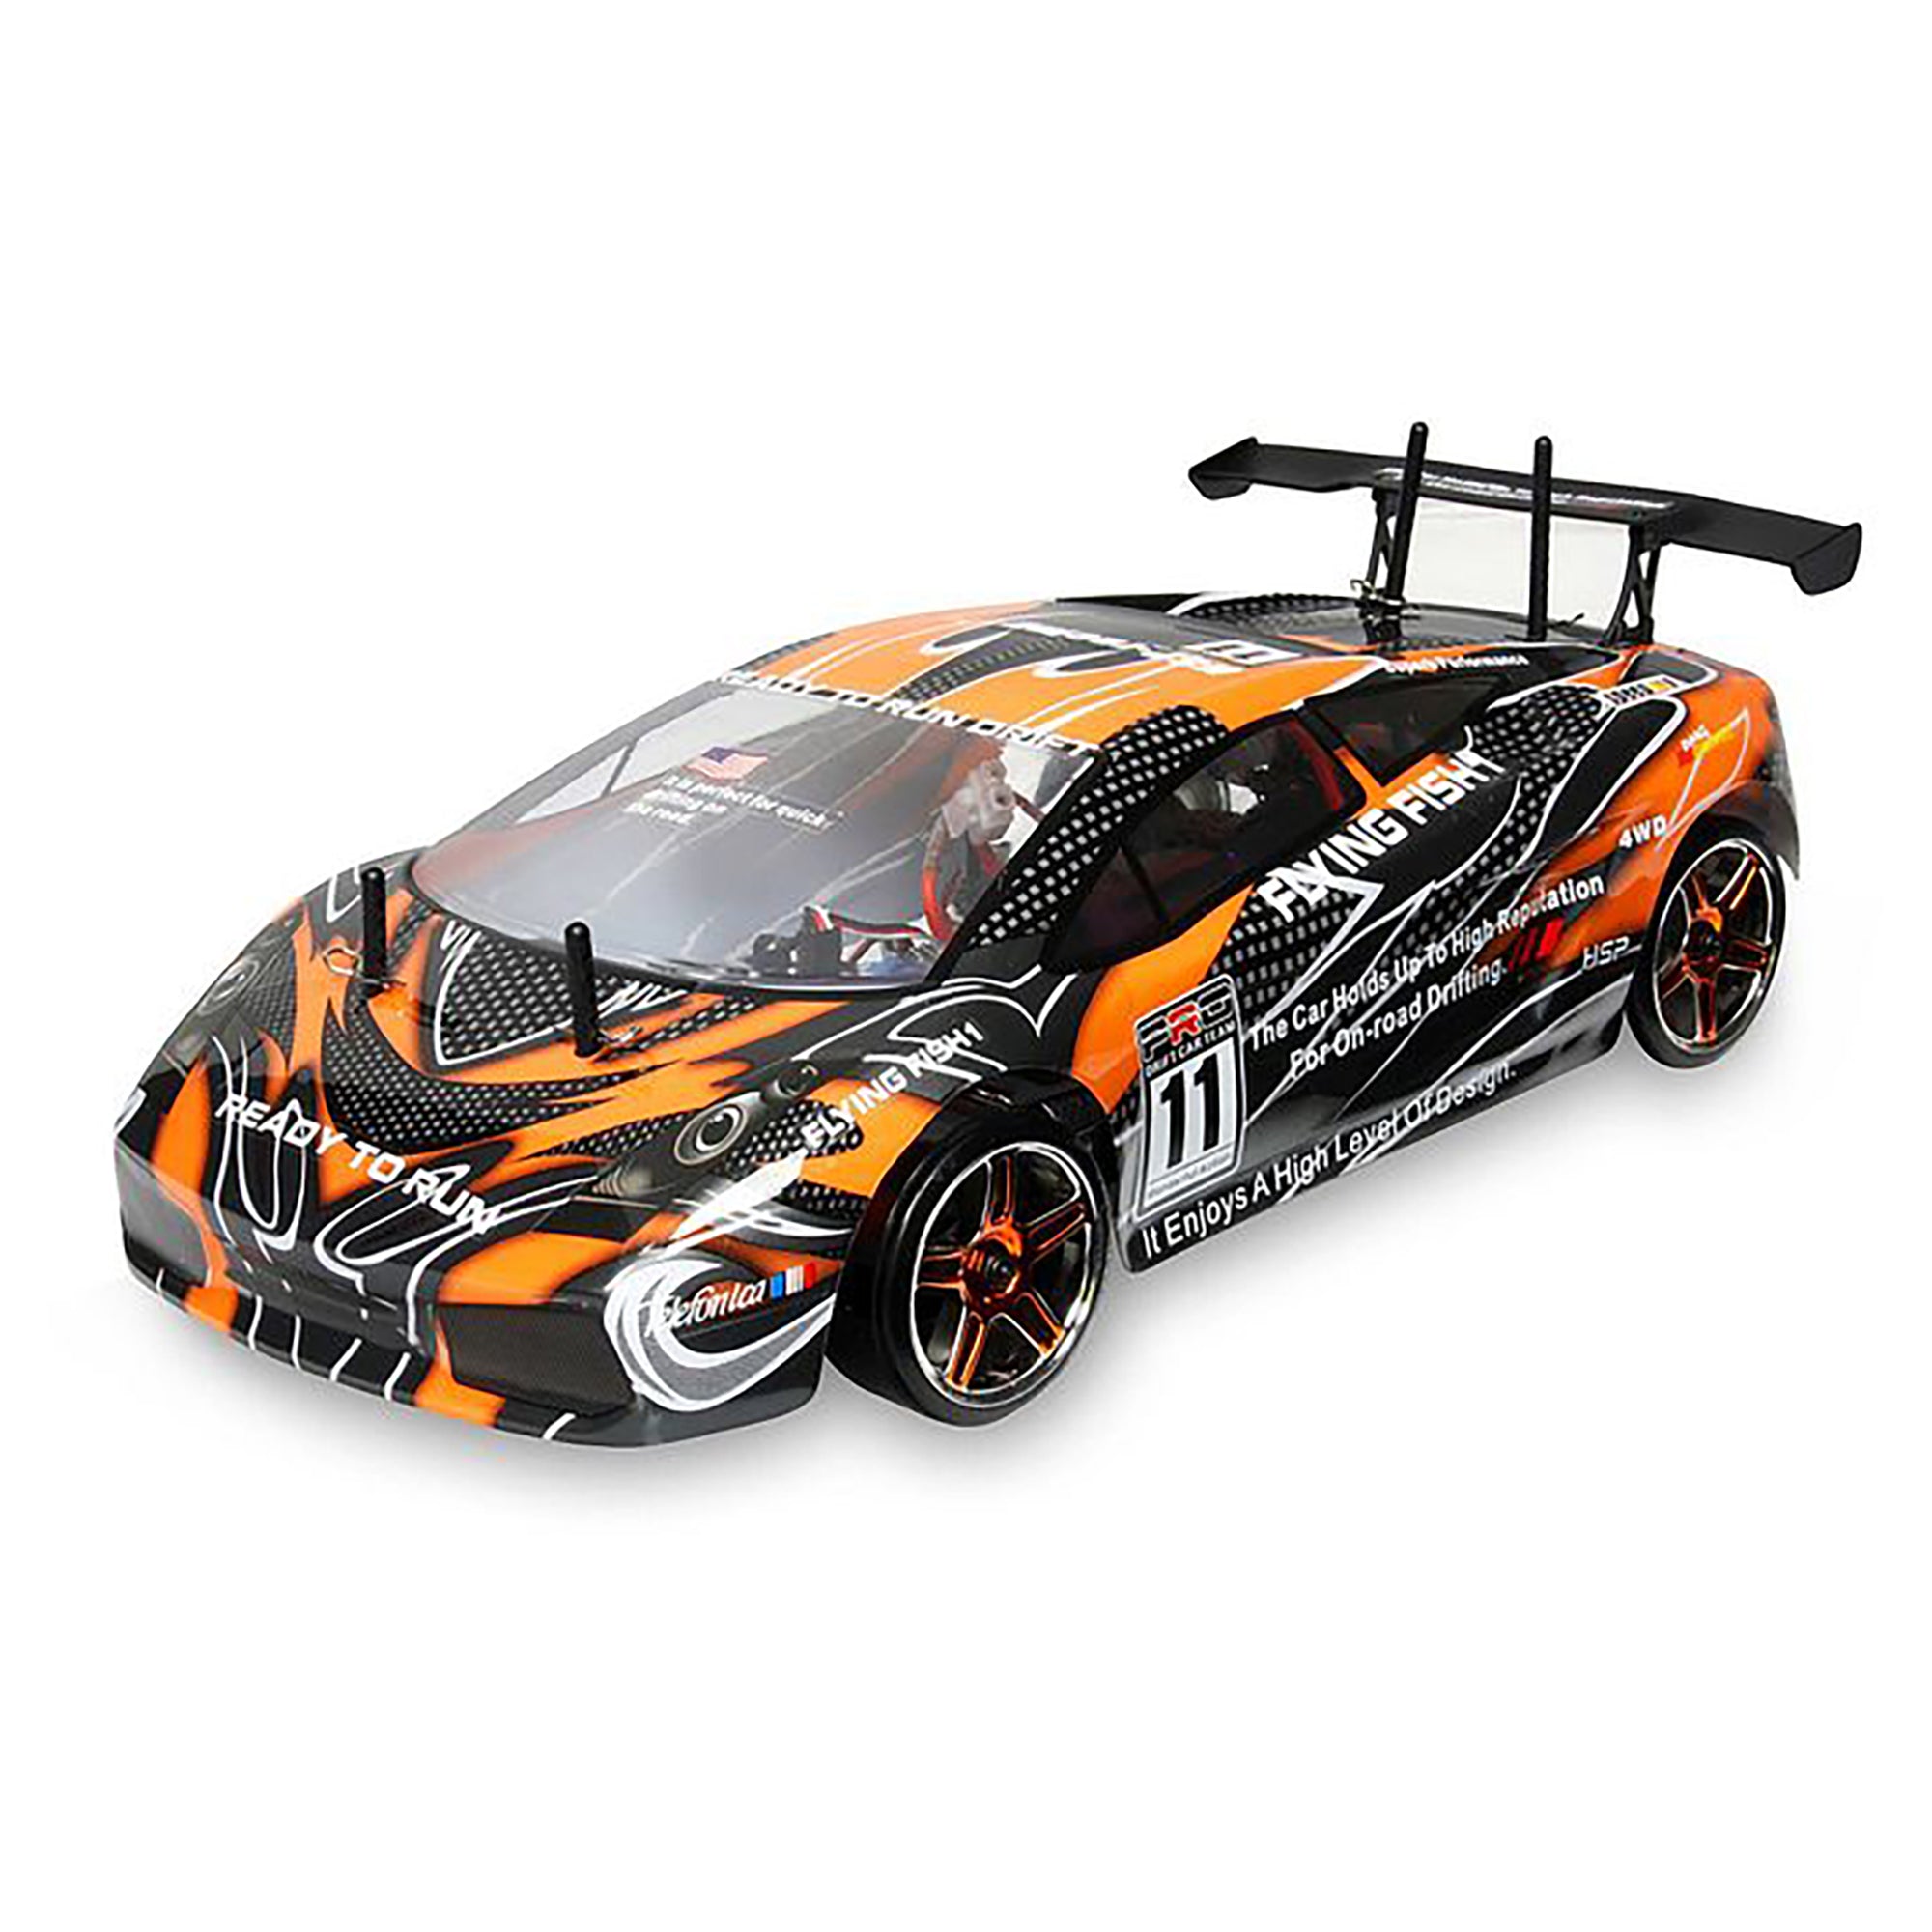 HSP Racing 94123-10030-1 2.4Ghz Flying Fish Electric Drift Road 1/10 Scale RC Car